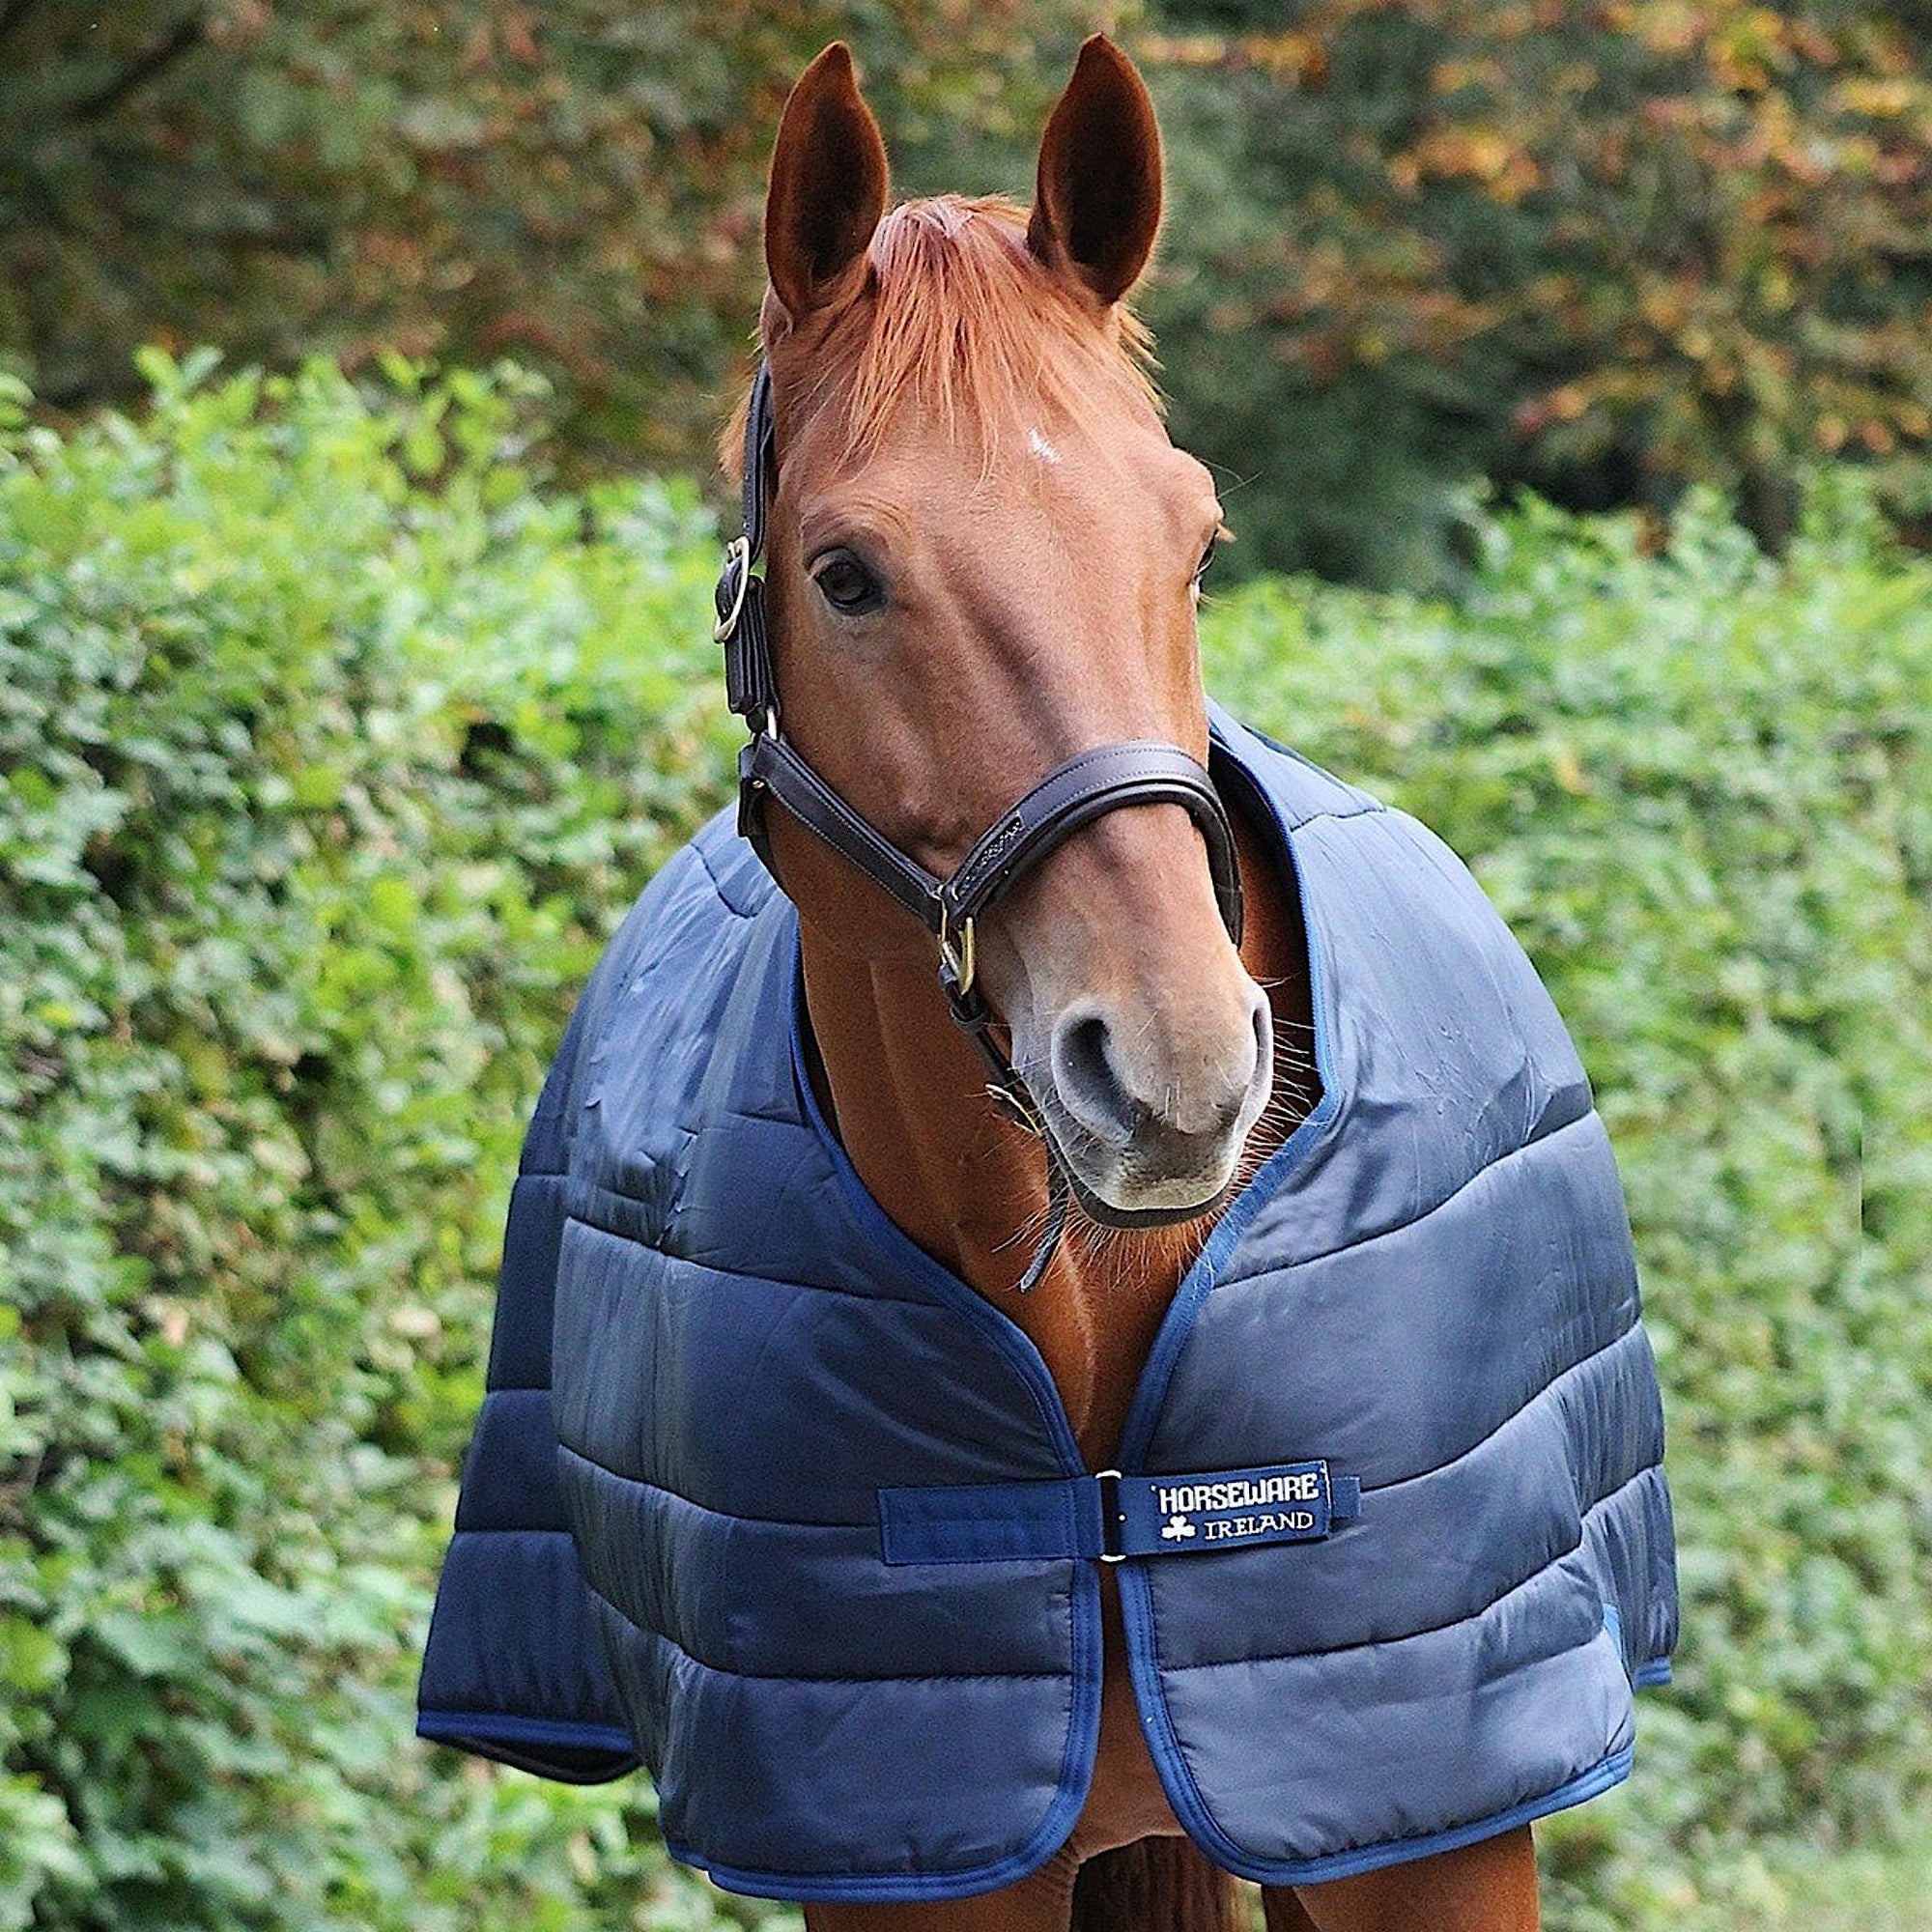 Horse wearing rug liner that is navy in colouring, with navy trim.